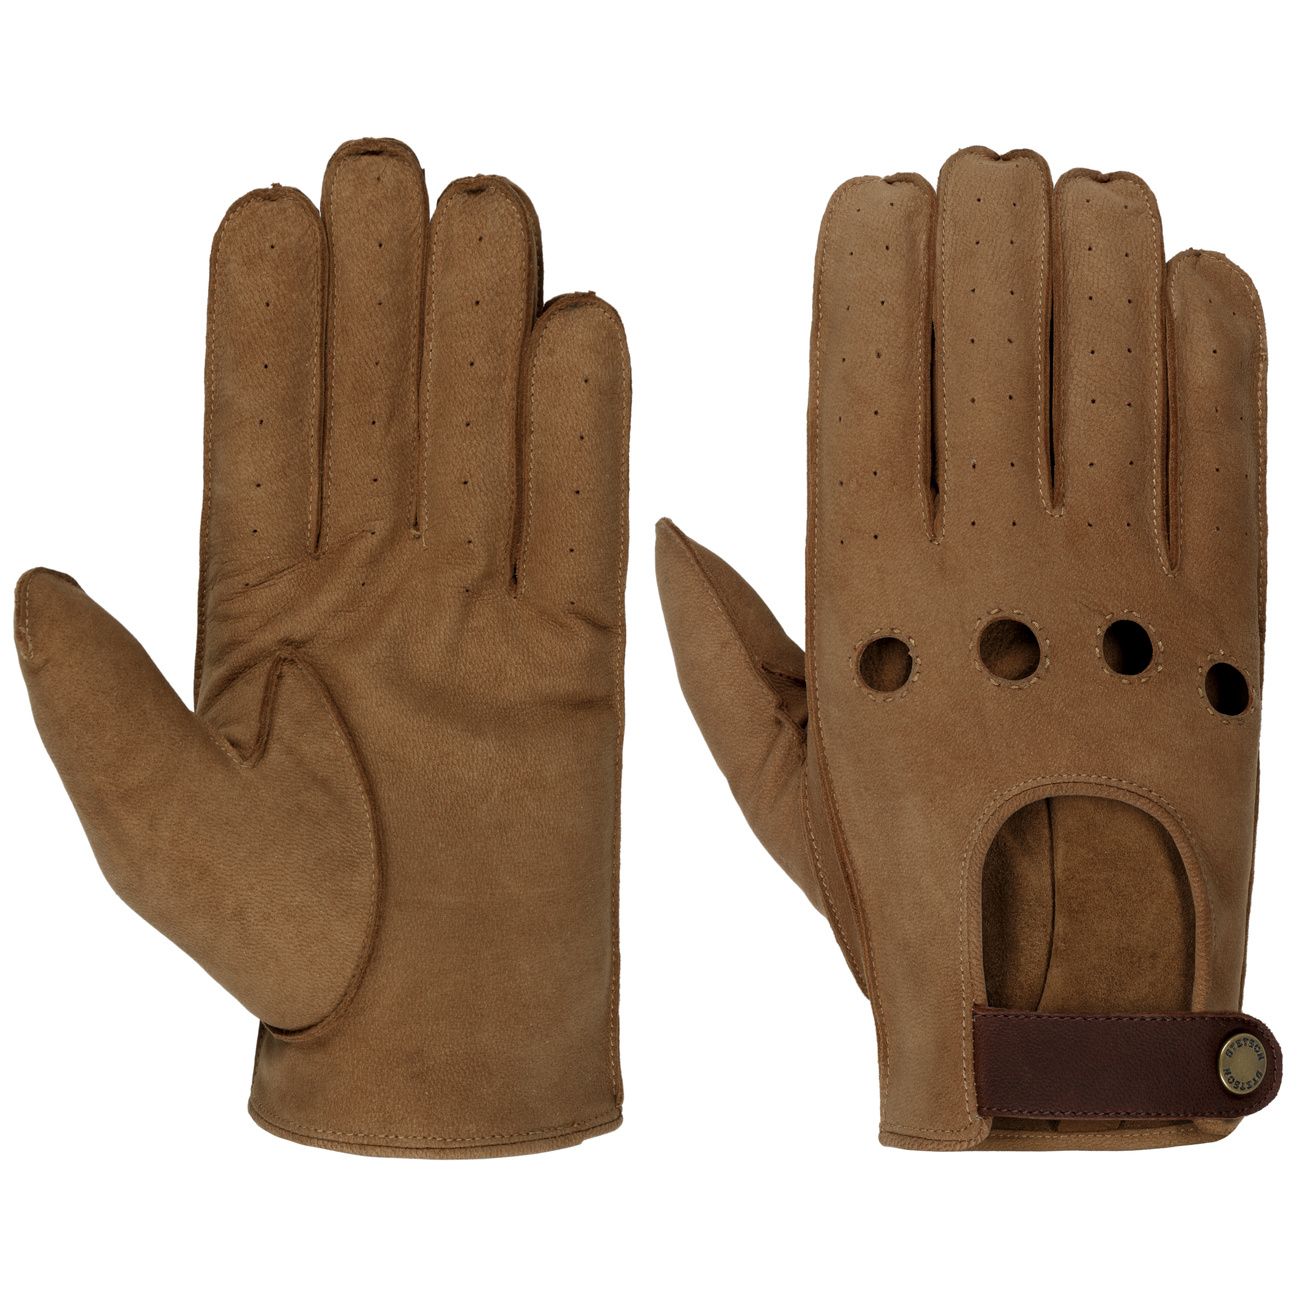 Stetson - Vented Leather Gloves - Brown